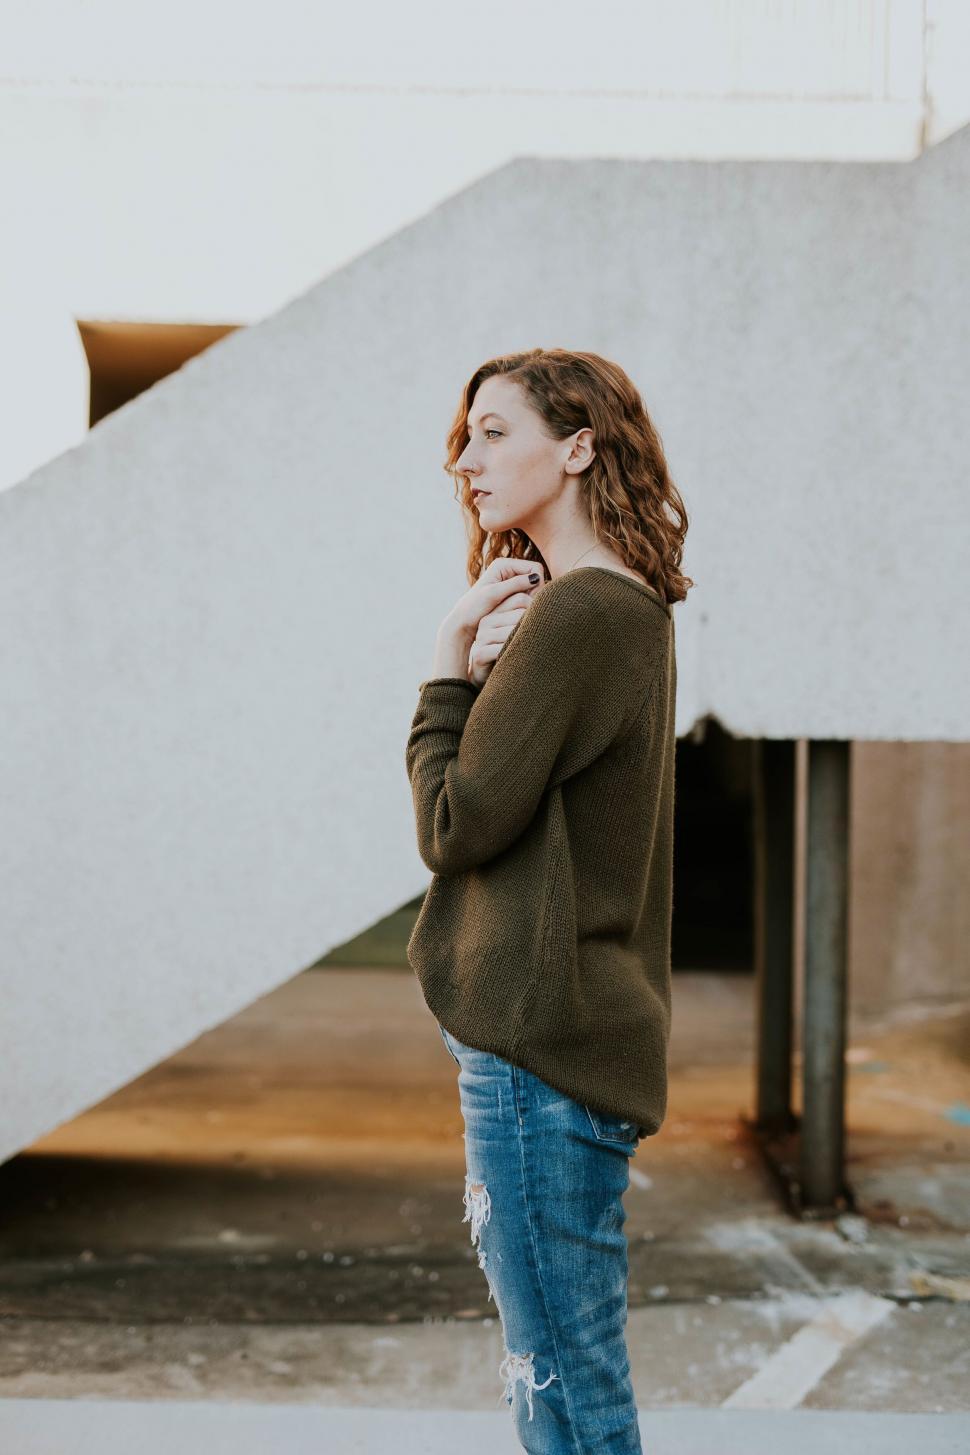 Free Image of Woman looking over shoulder in urban setting 